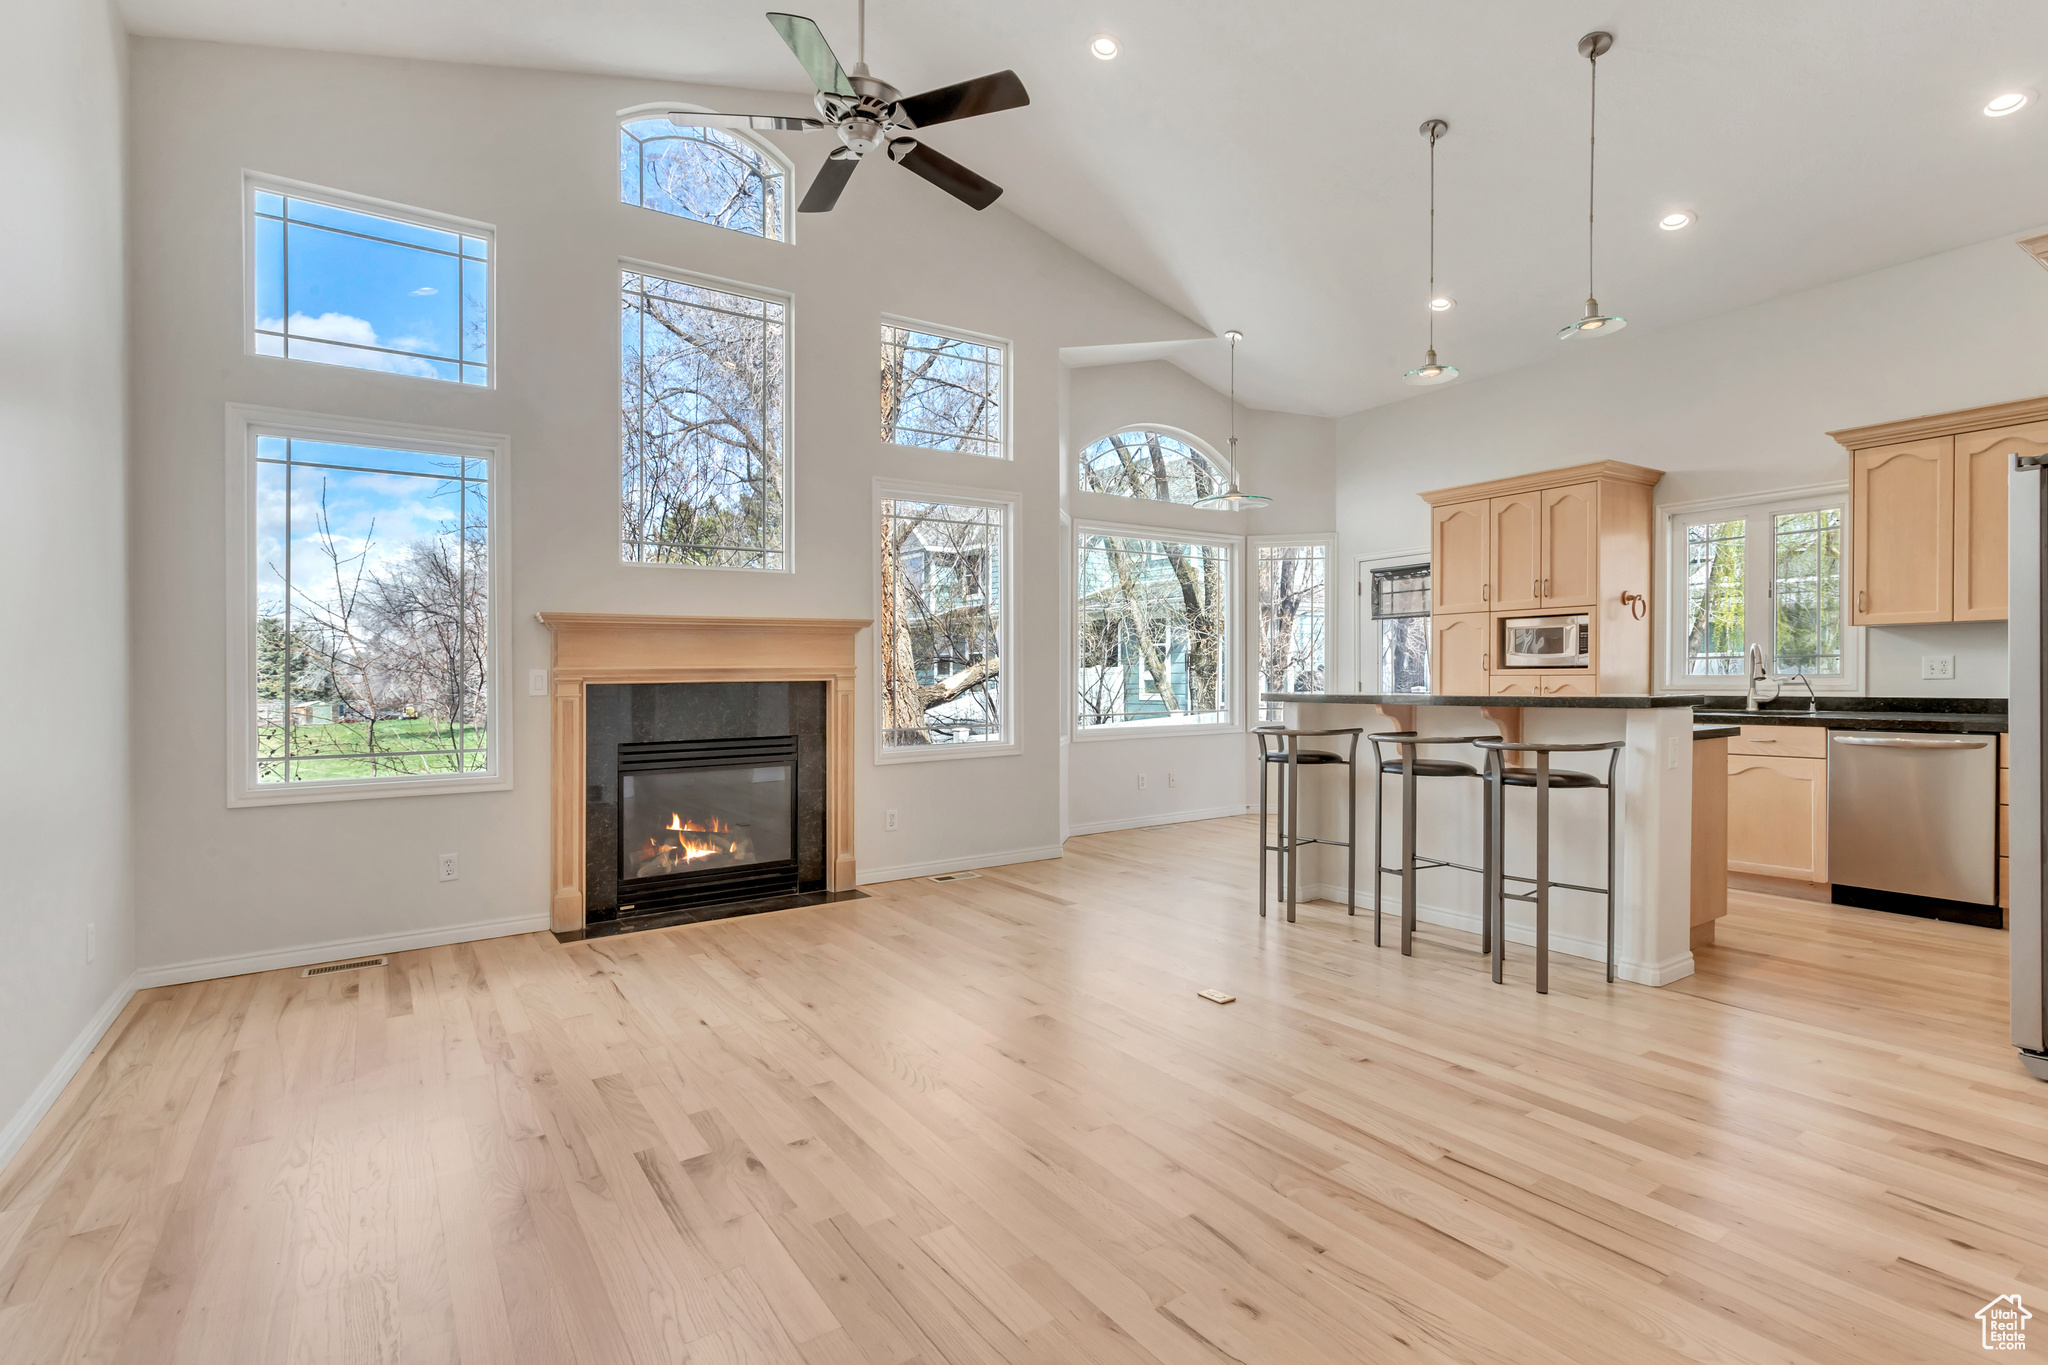 Breathtaking open concept family room and kitchen on main level, complete with gas fireplace, vaulted ceilings, new LED lighting, ceiling fan, custom windows, new flooring, plenty of natural light, and beautiful views